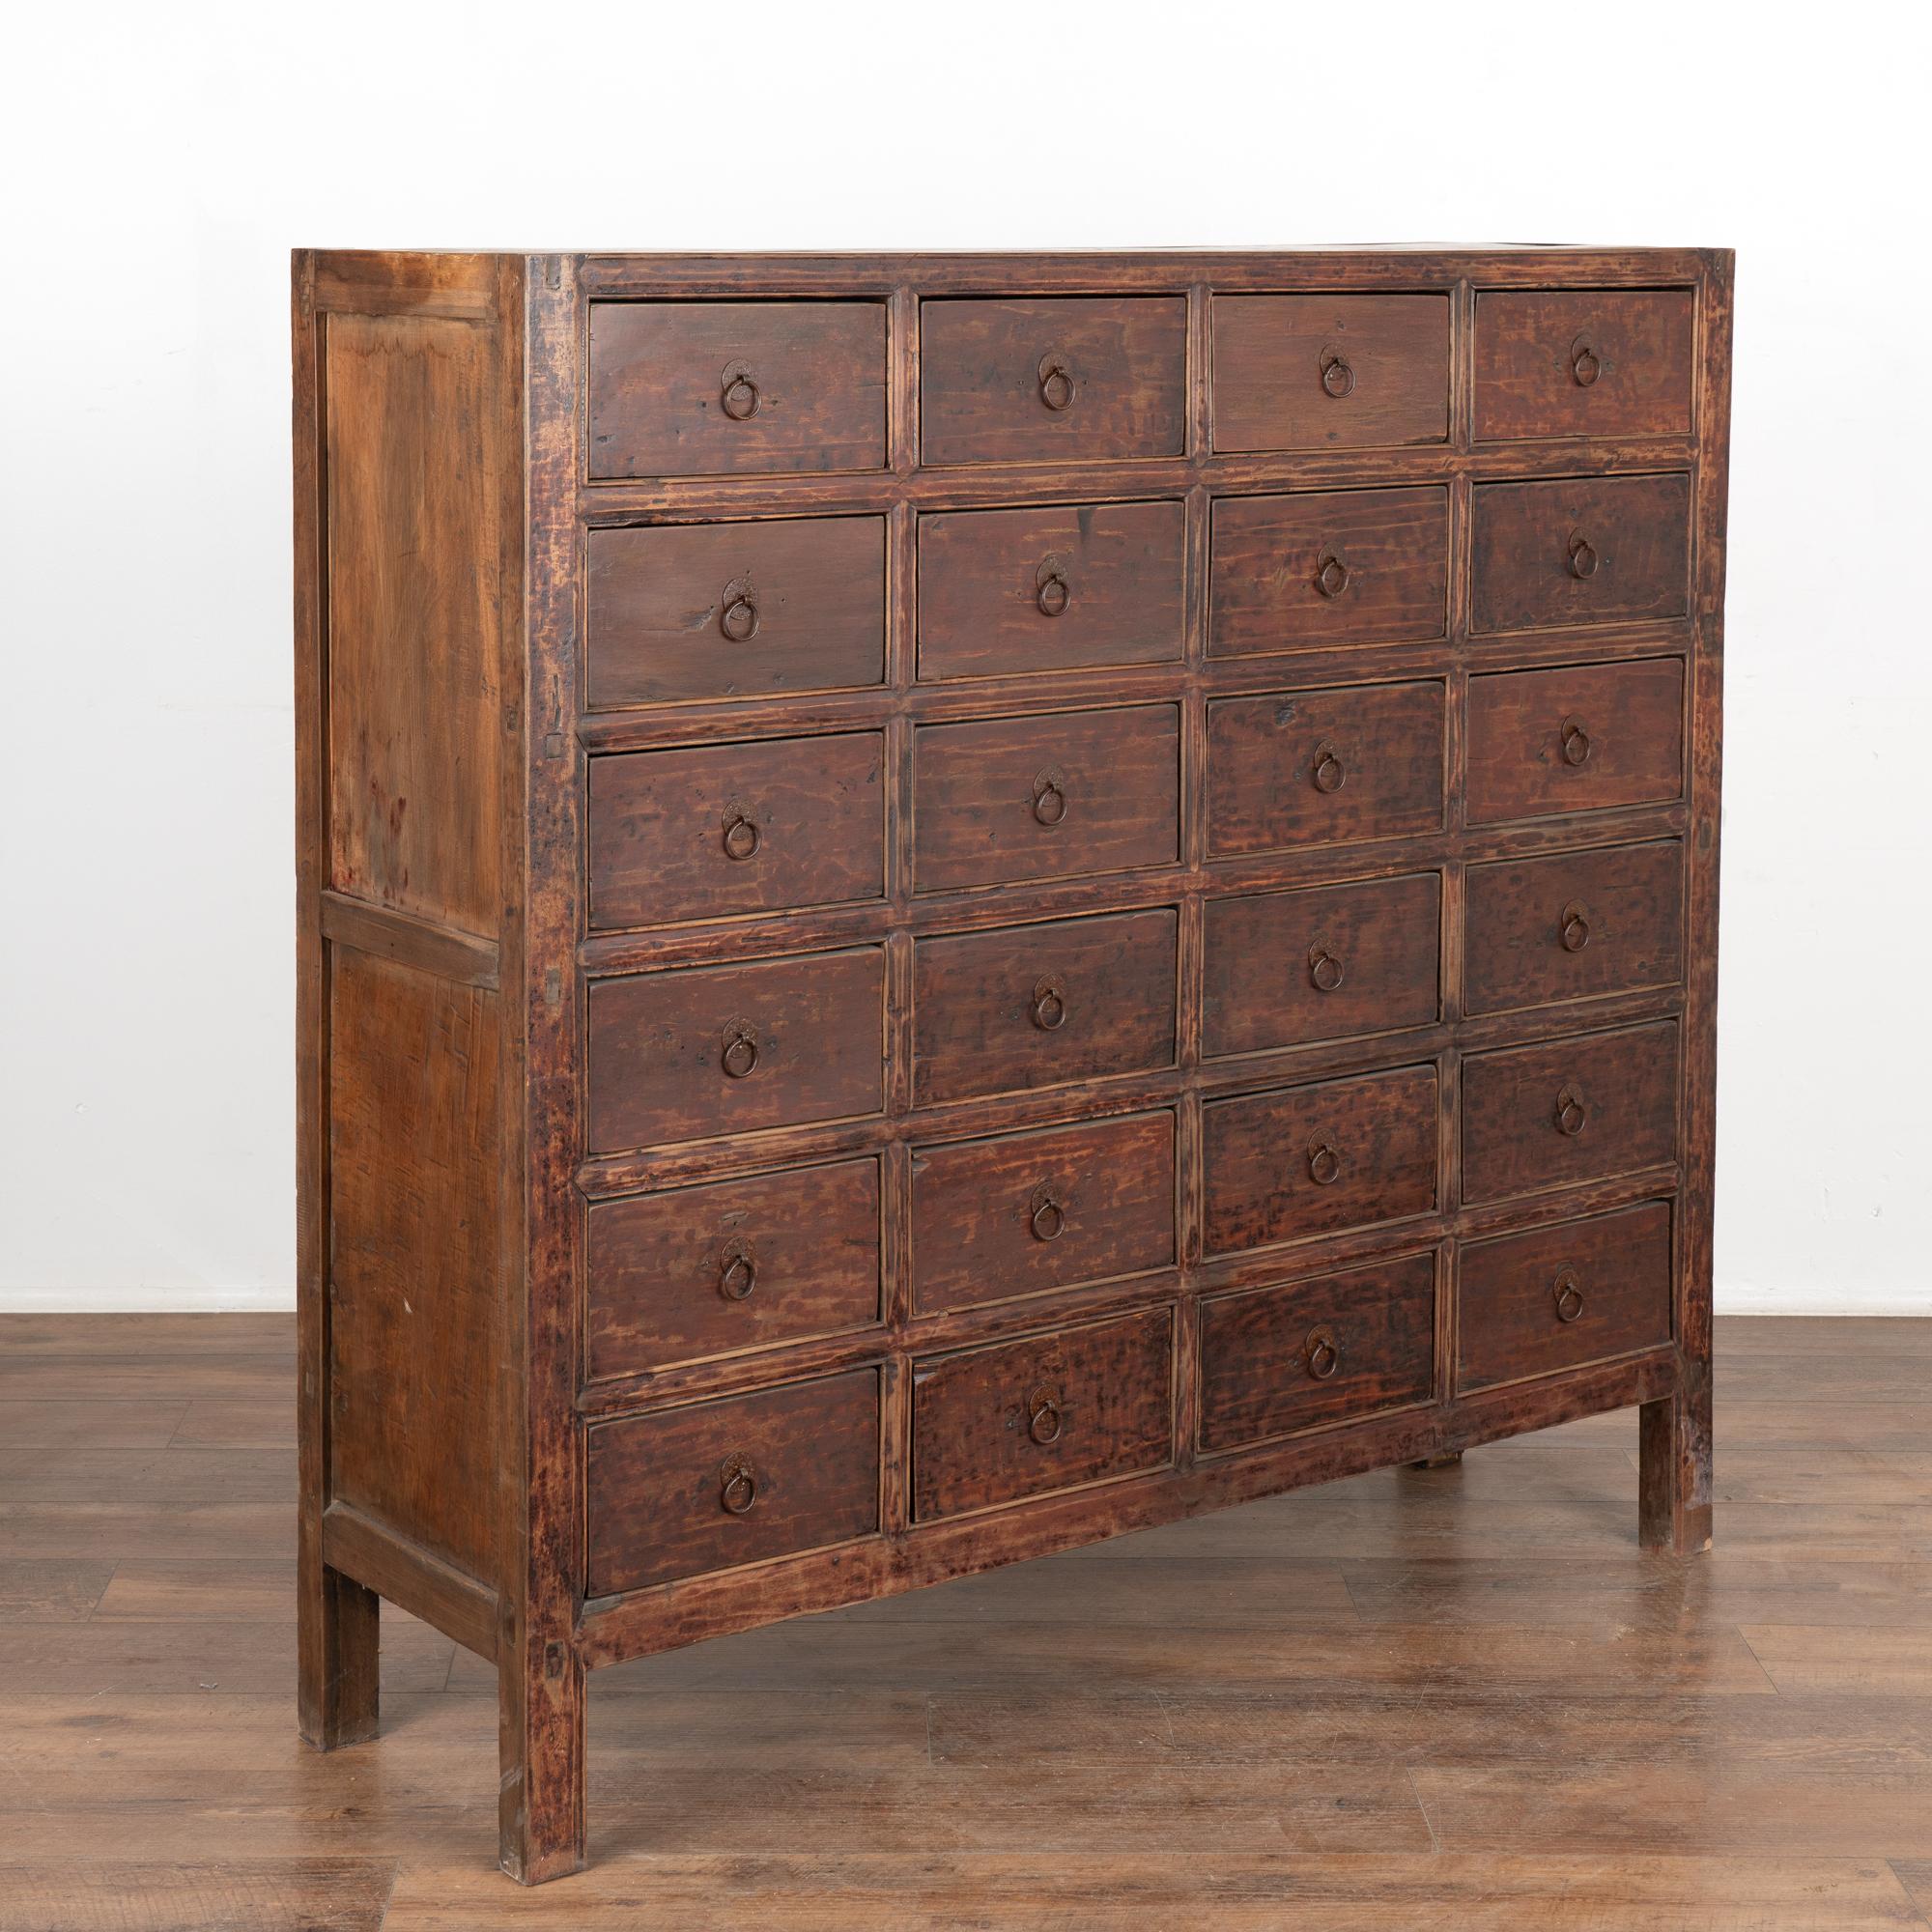 There is something visually mesmerizing about an old apothecary and this unique Chinese cabinet from the 1800's is no exception.
The old brown painted finish has slight red undertones and is accentuated by a hand buffed finish, leaving a warm